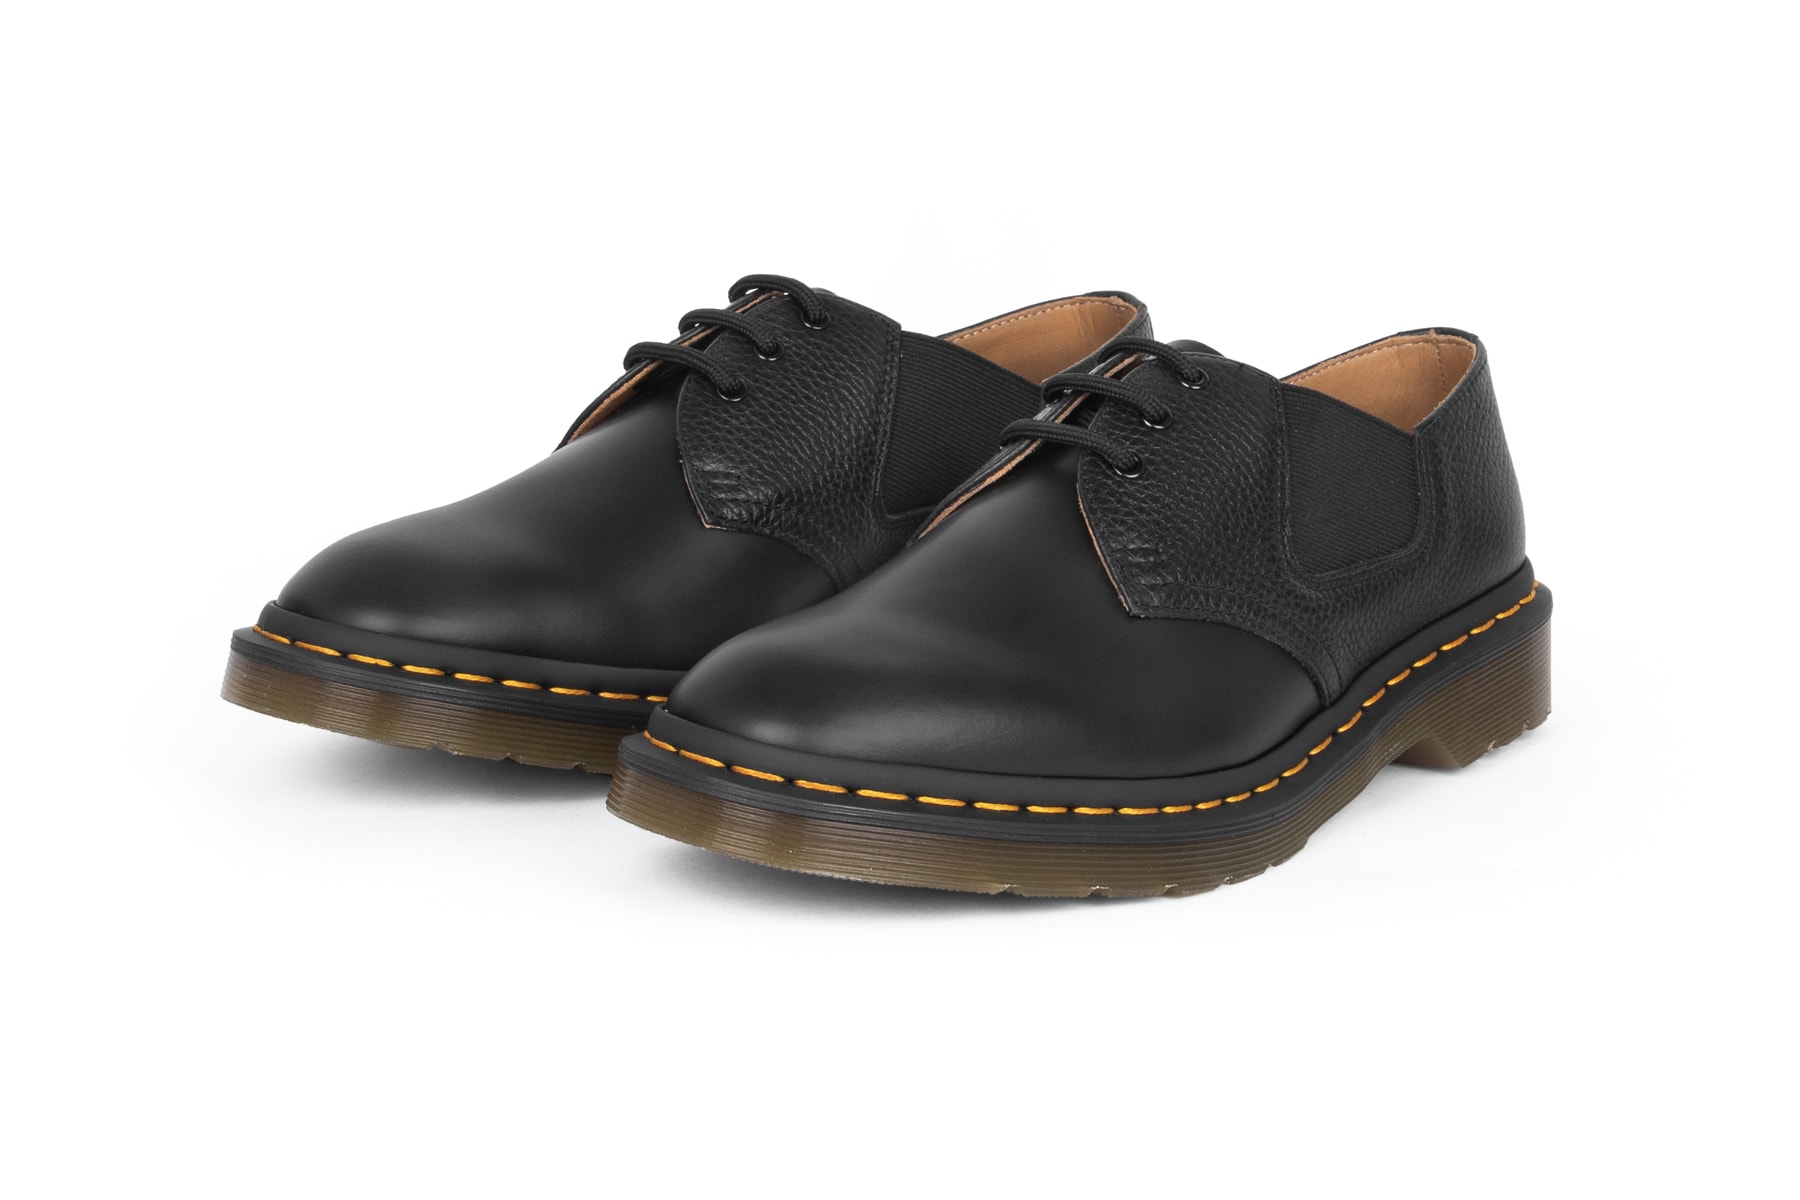 United Arrows sons Dr. Martens 1461 Shoe leather collaboration collection release date price drop release date buy purchase sale sell low